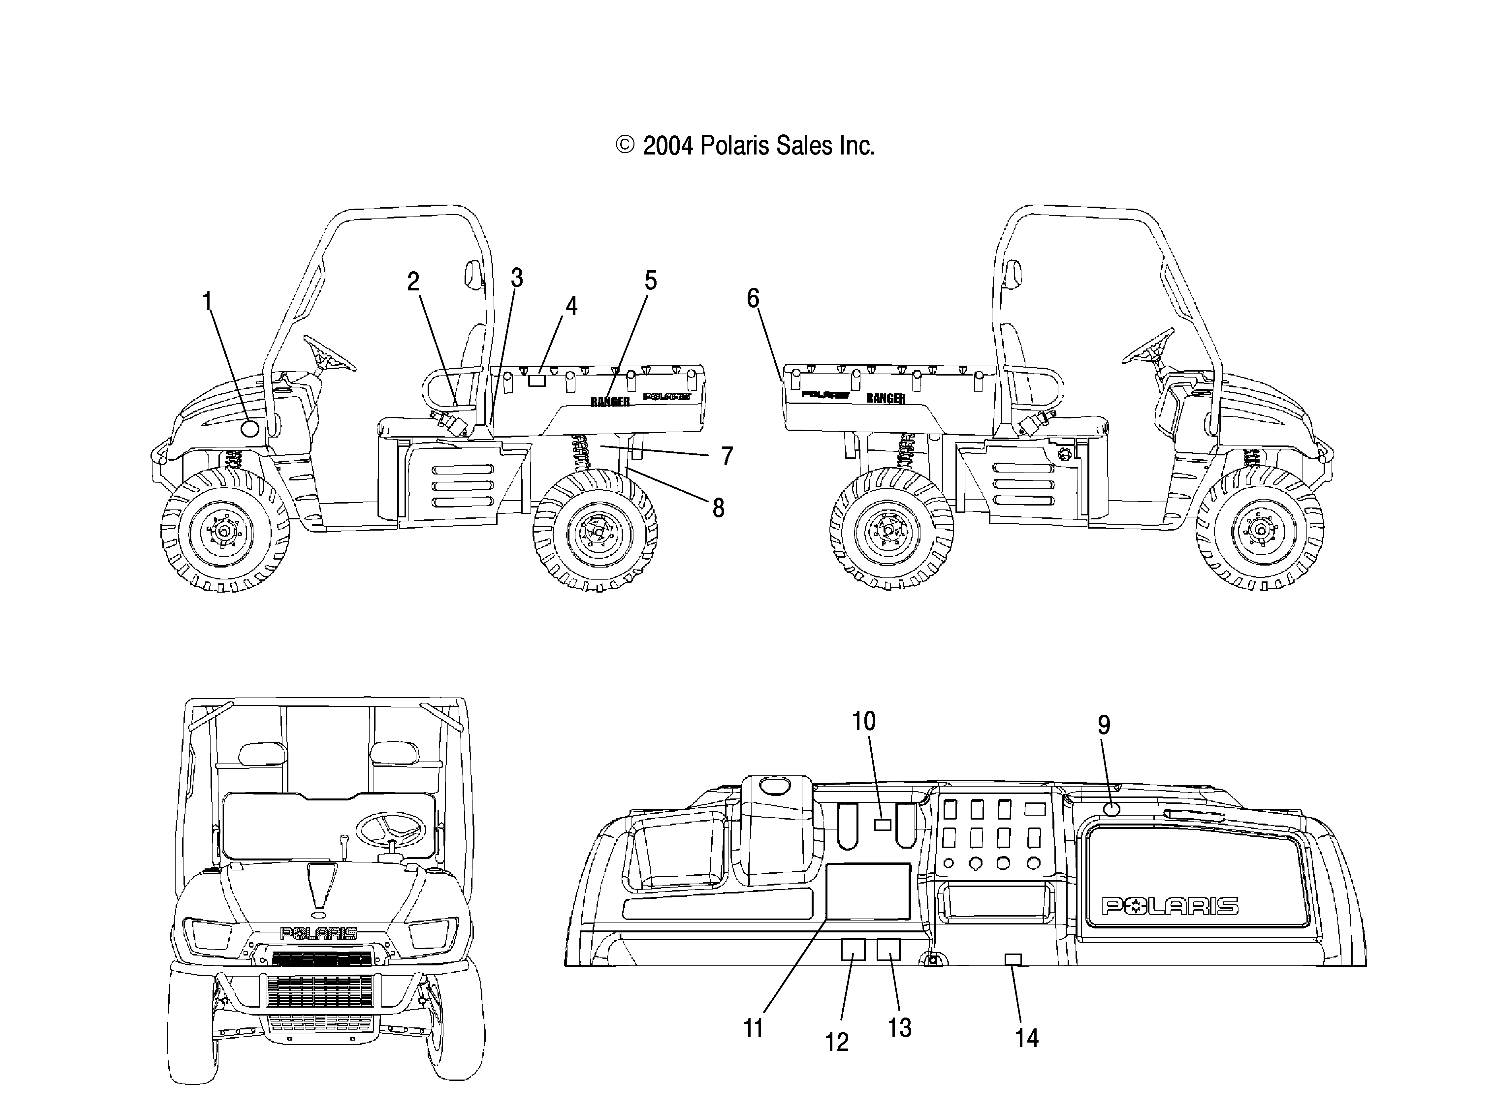 Part Number : 7172674 DECAL-CAUTION  SHIFT AT IDLE